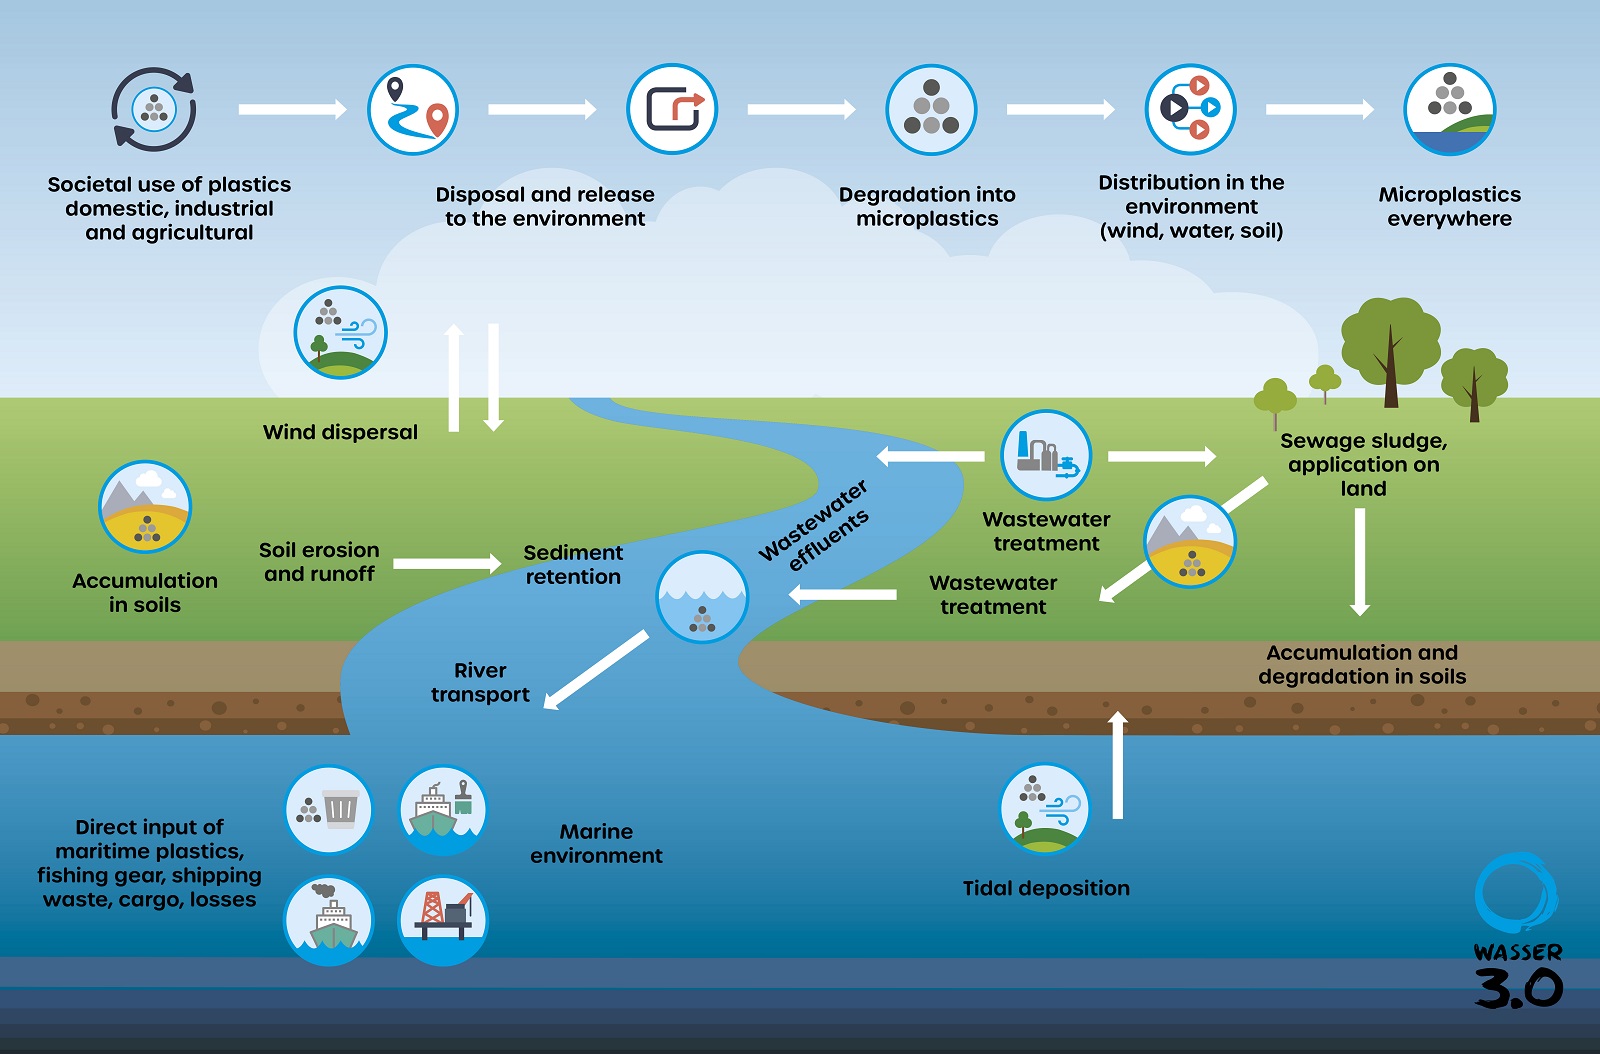 Microplastics in the environment - entry path and distribution ways